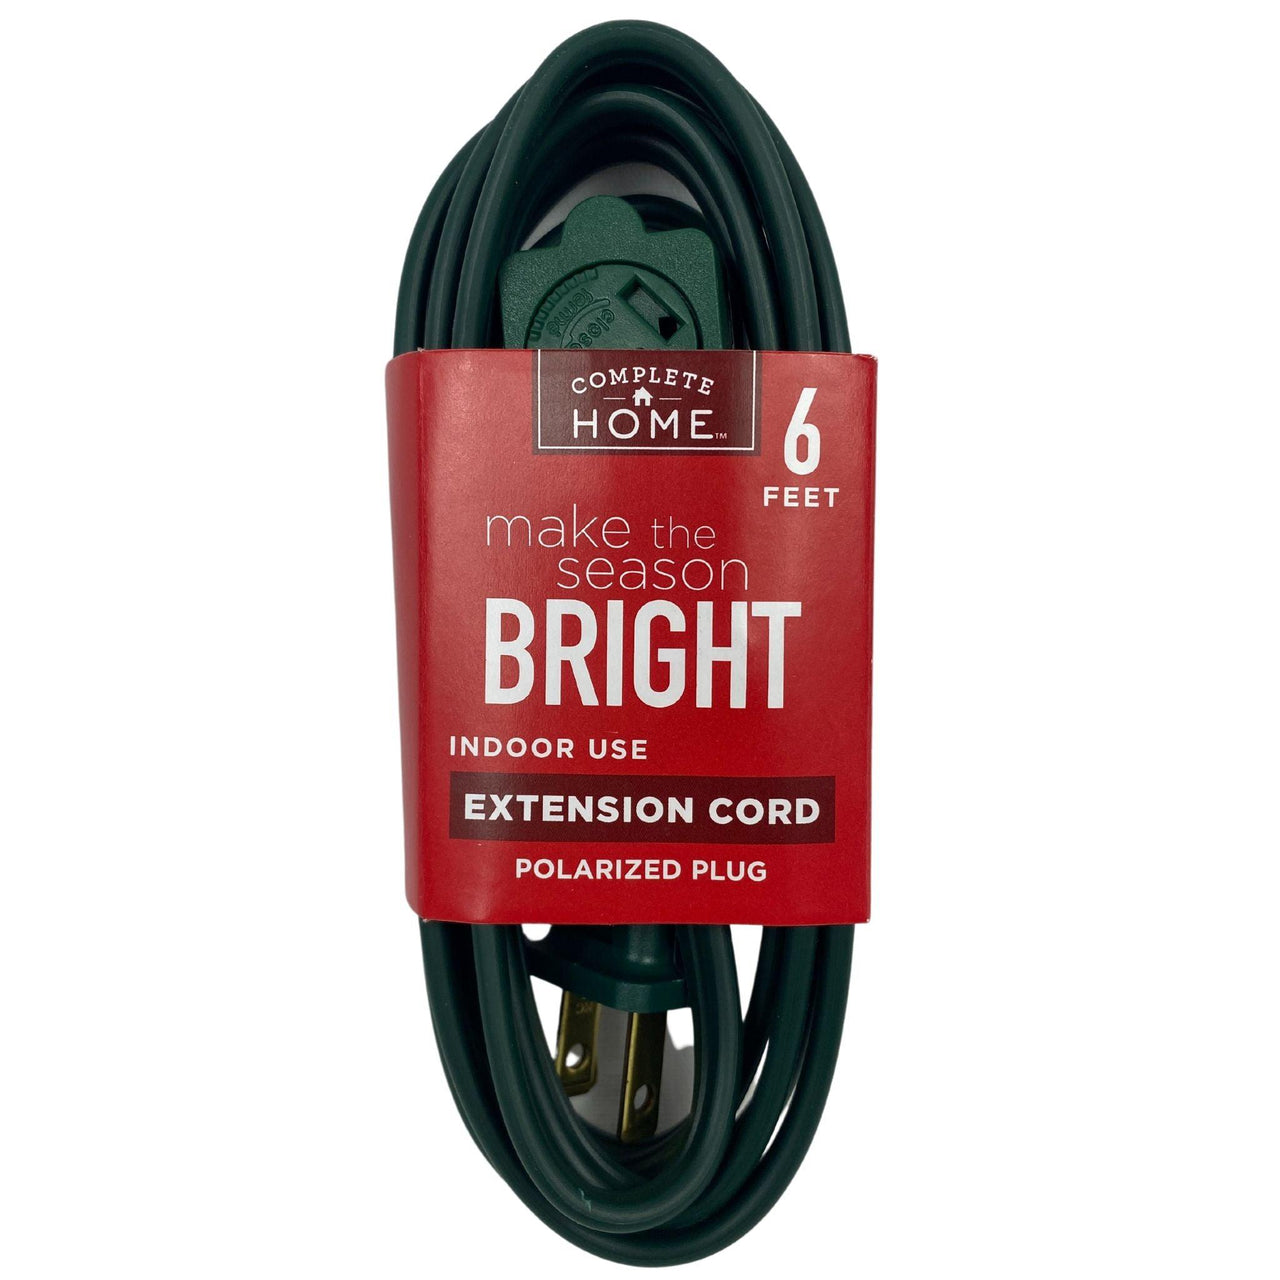 Make The Season Bright Indoor Use 6 Feet Extension Cord (60 Pcs Lot) - Discount Wholesalers Inc